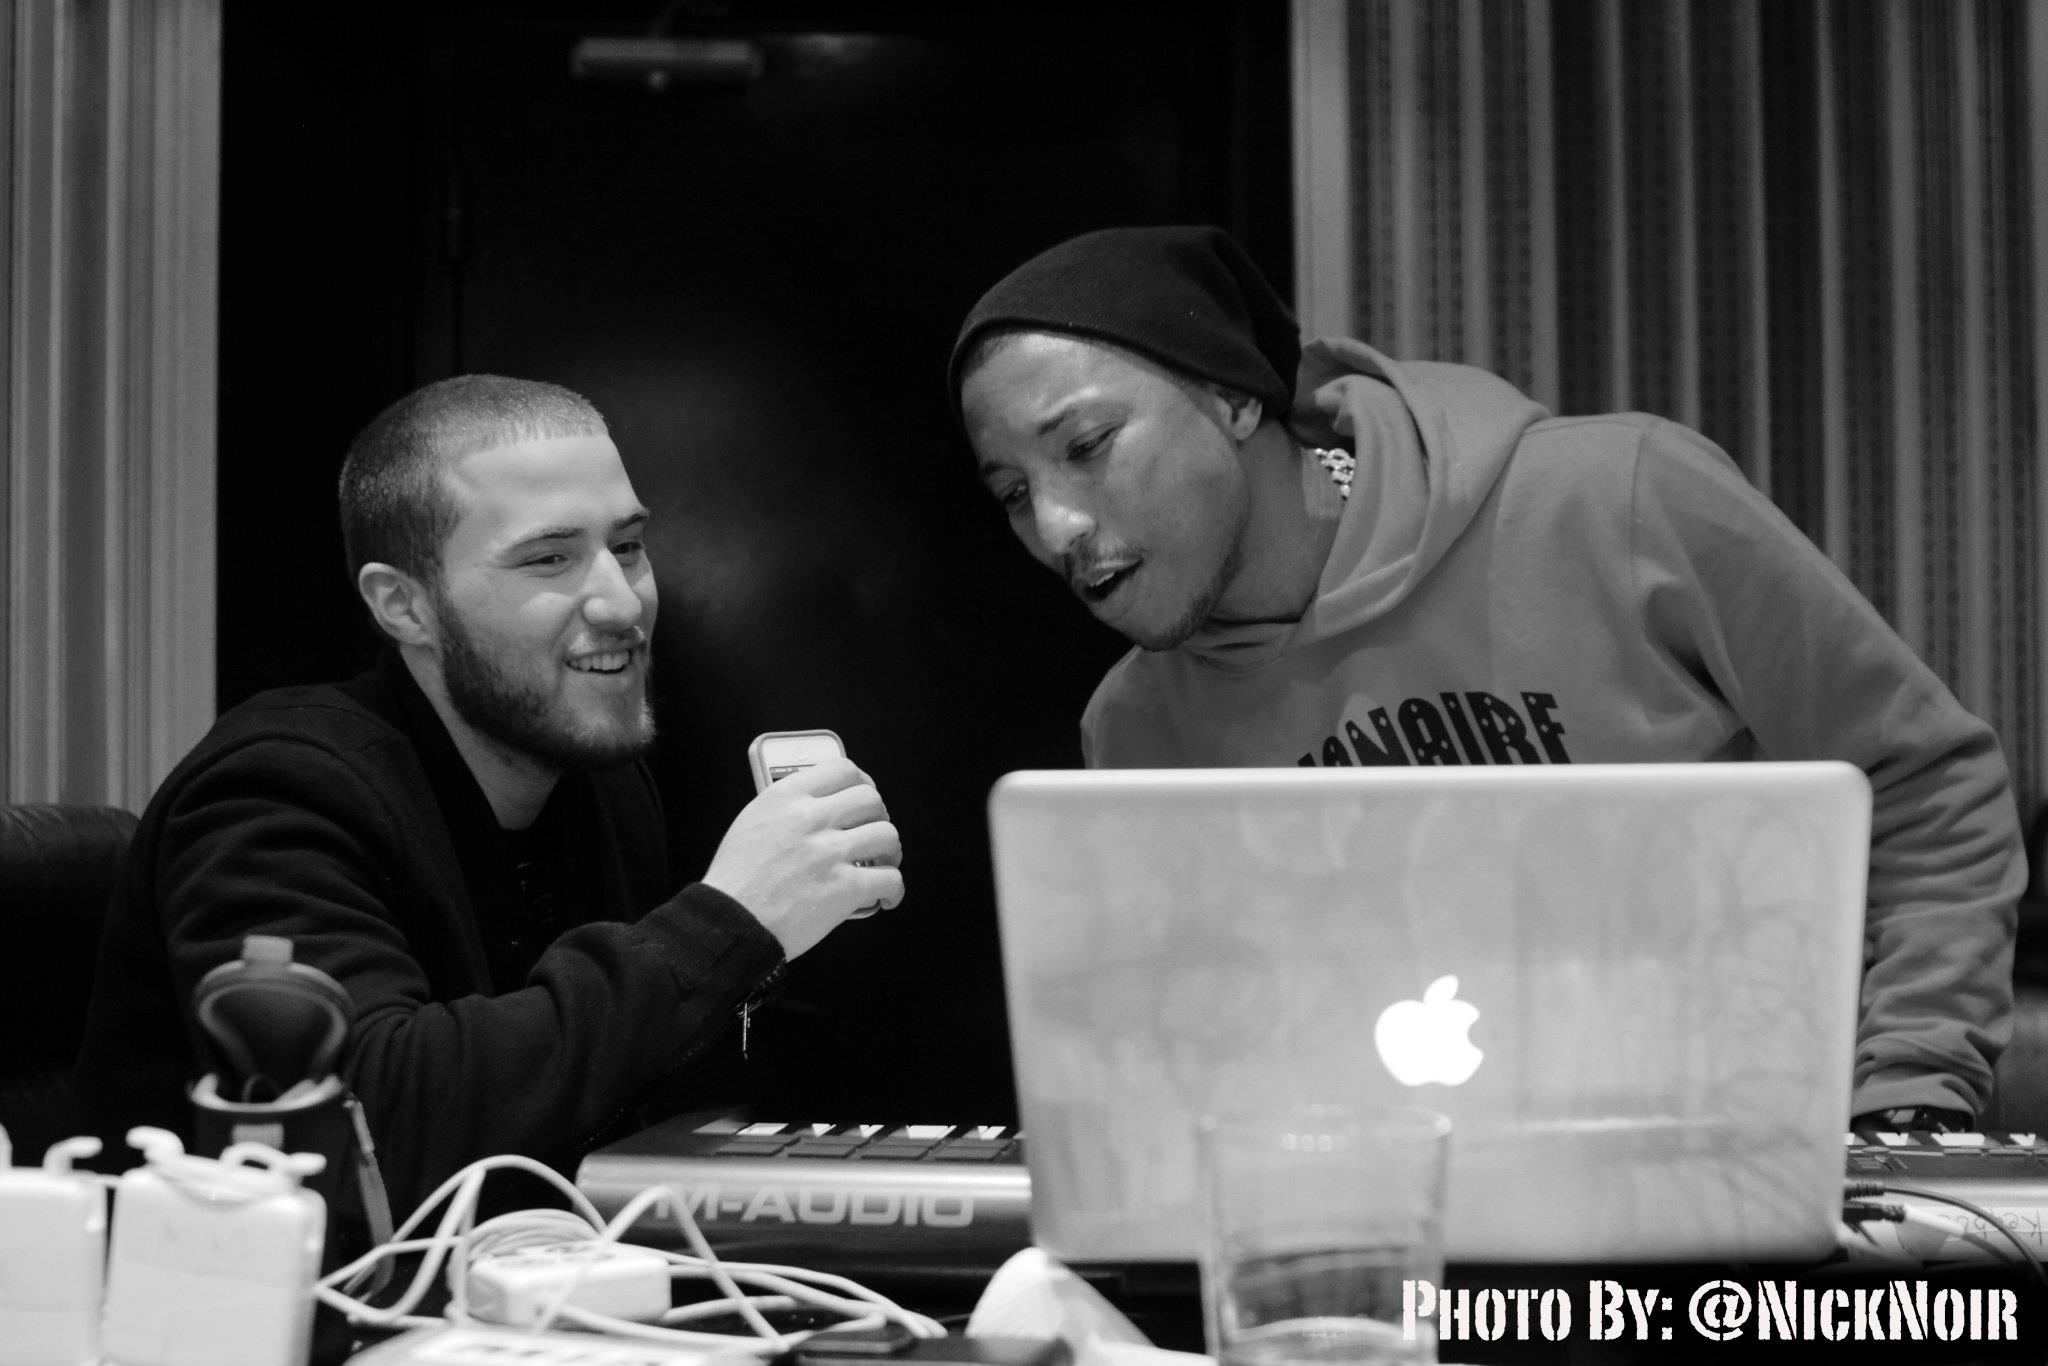 Mike Posner and Pharrell 1/9/2012
Photo taken by Nicholas Black
